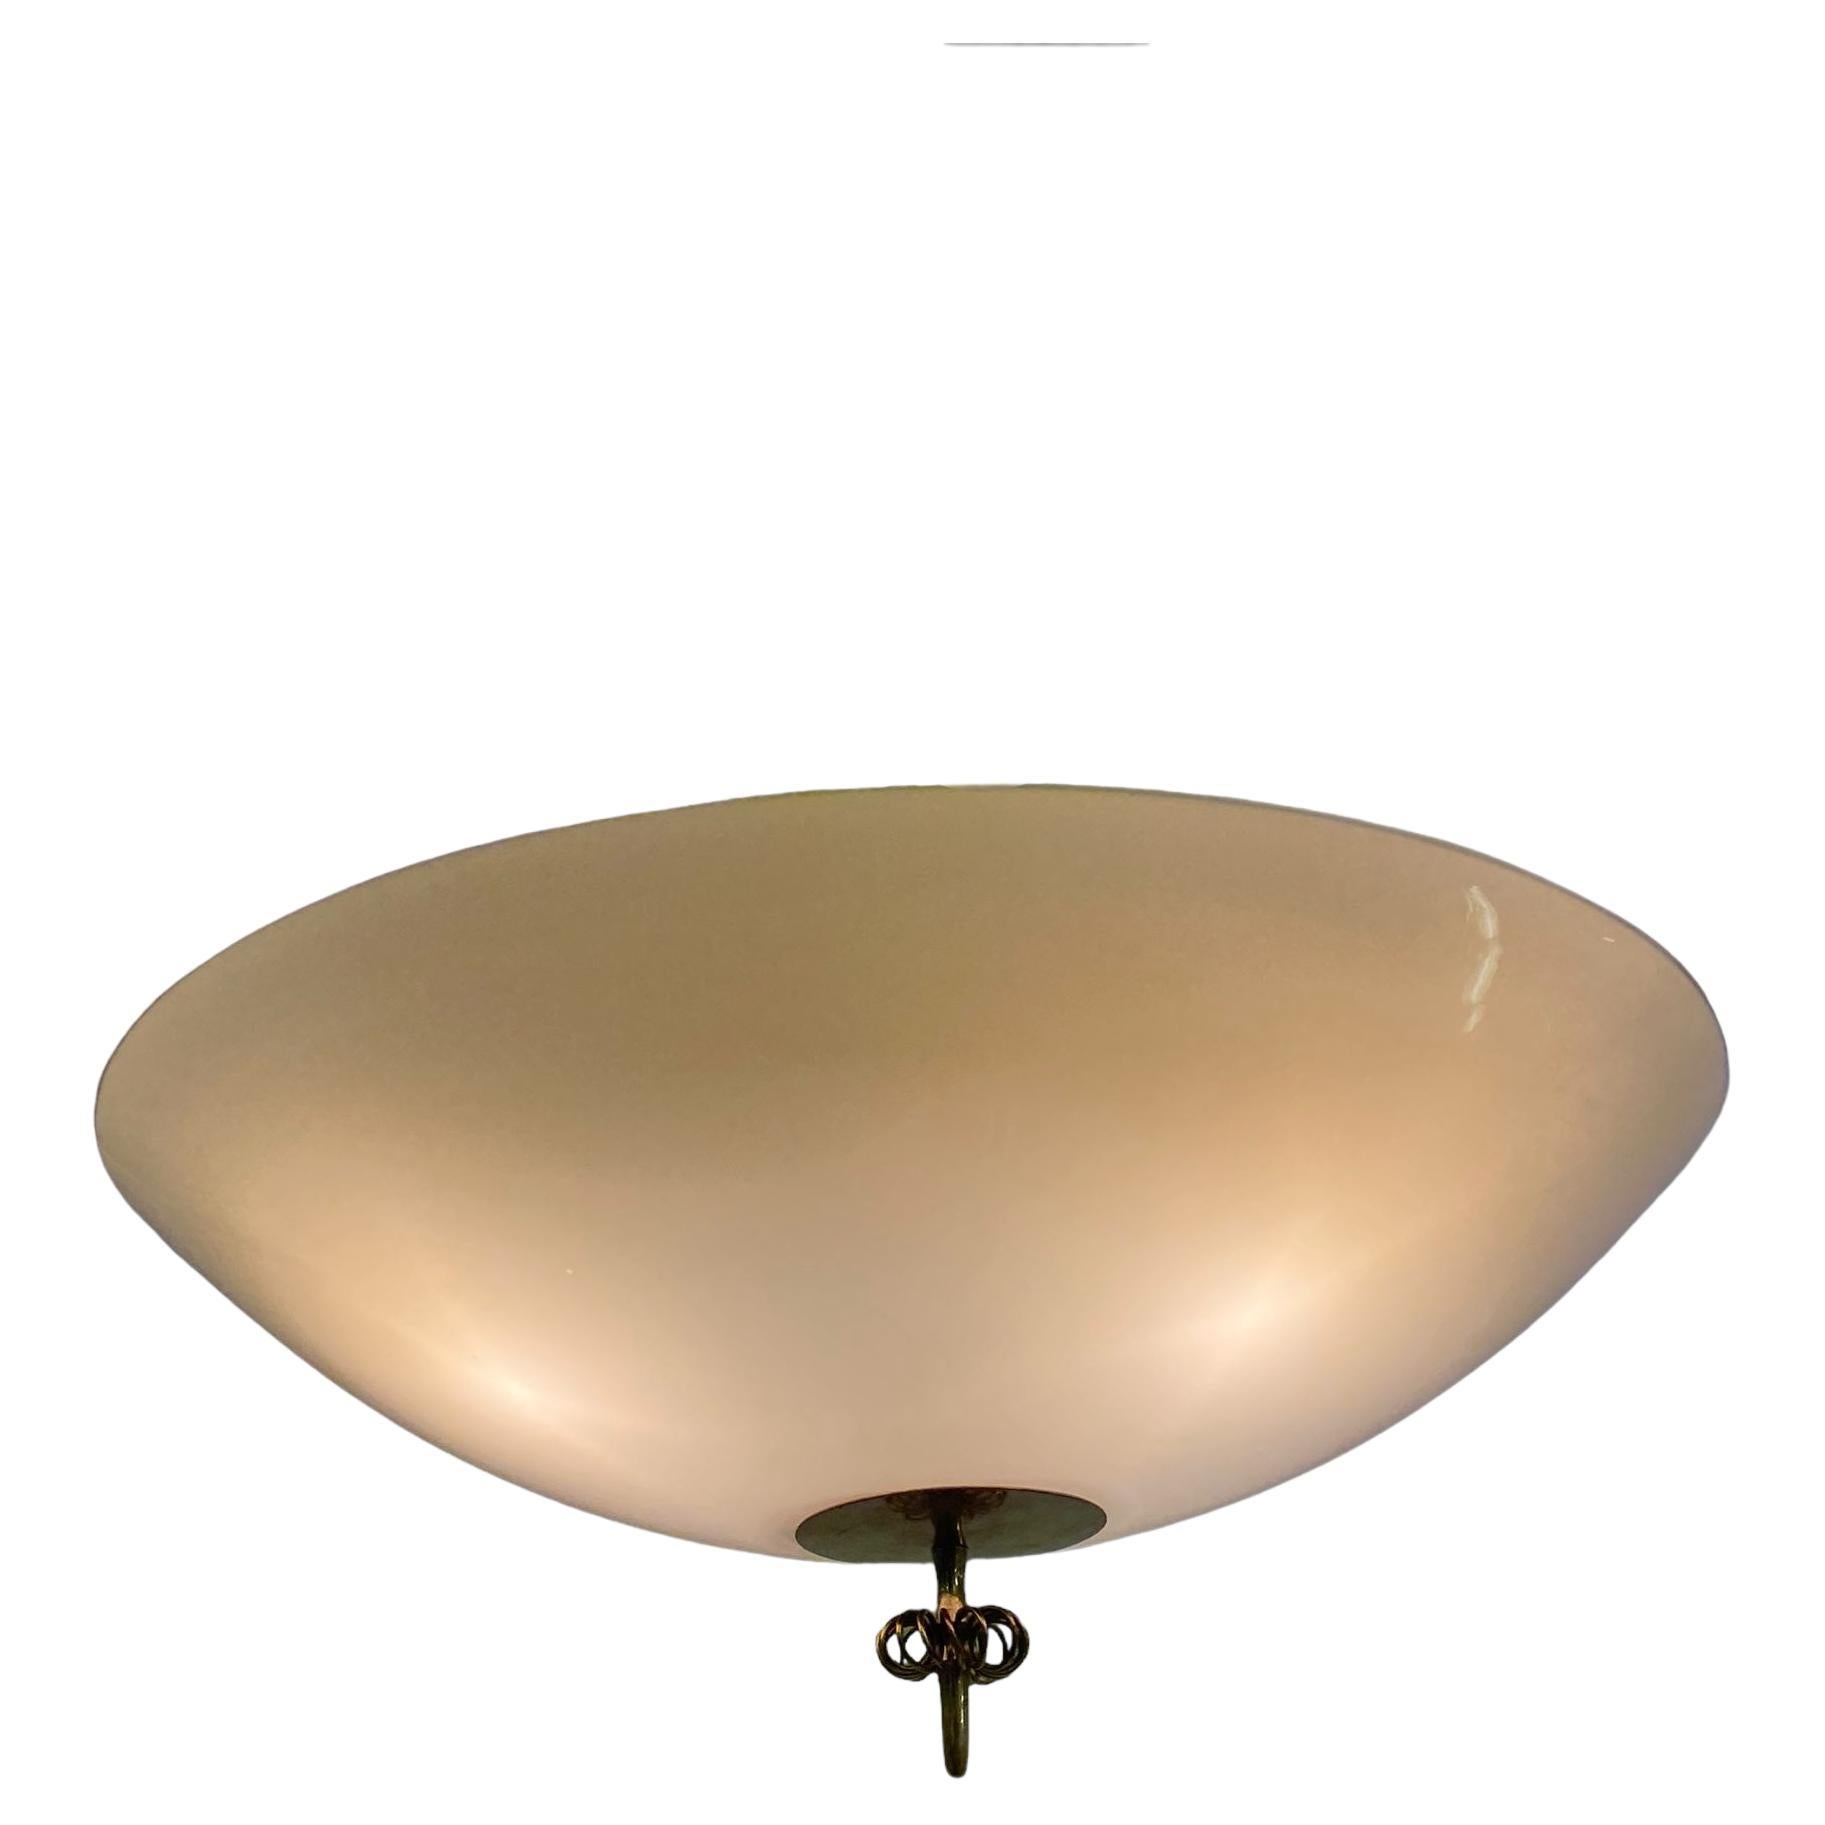 A beautiful ceiling lamp by Paavo Tynell. This model flush mount came with different size glass/fabric version shades, mainly 40,45,50,55 or 60 cm long, and 3 light bulbs. As most models this also came with a stem which would make into a pendant.